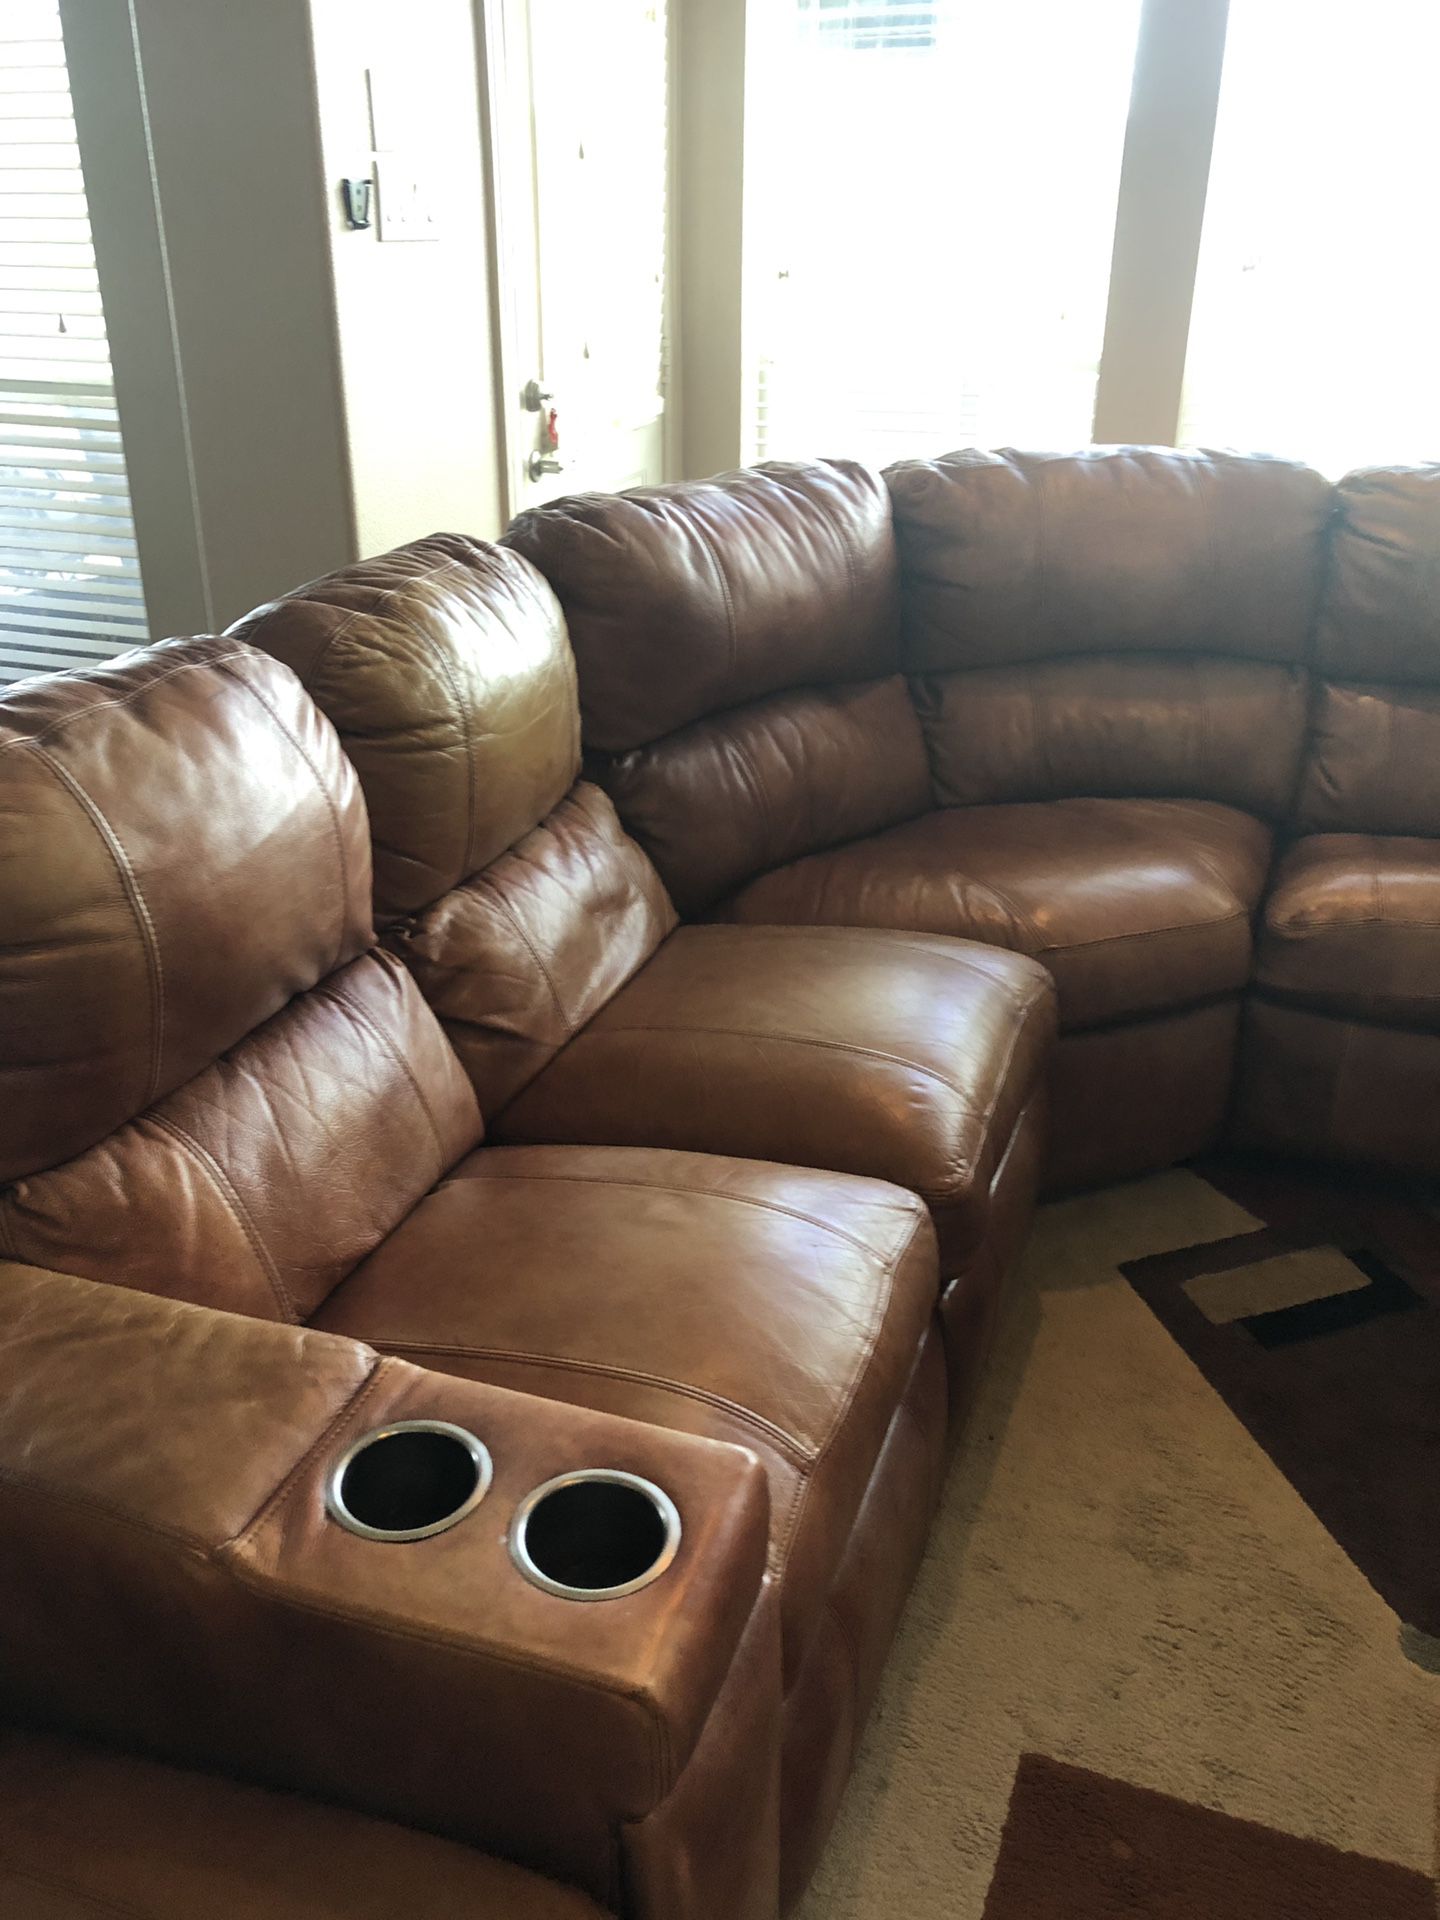 DIVORCED MUST SELL! 6 Piece Bassett John Elway Collection Leather Full Edition Sectional Recliner Sofa/Bed Couch